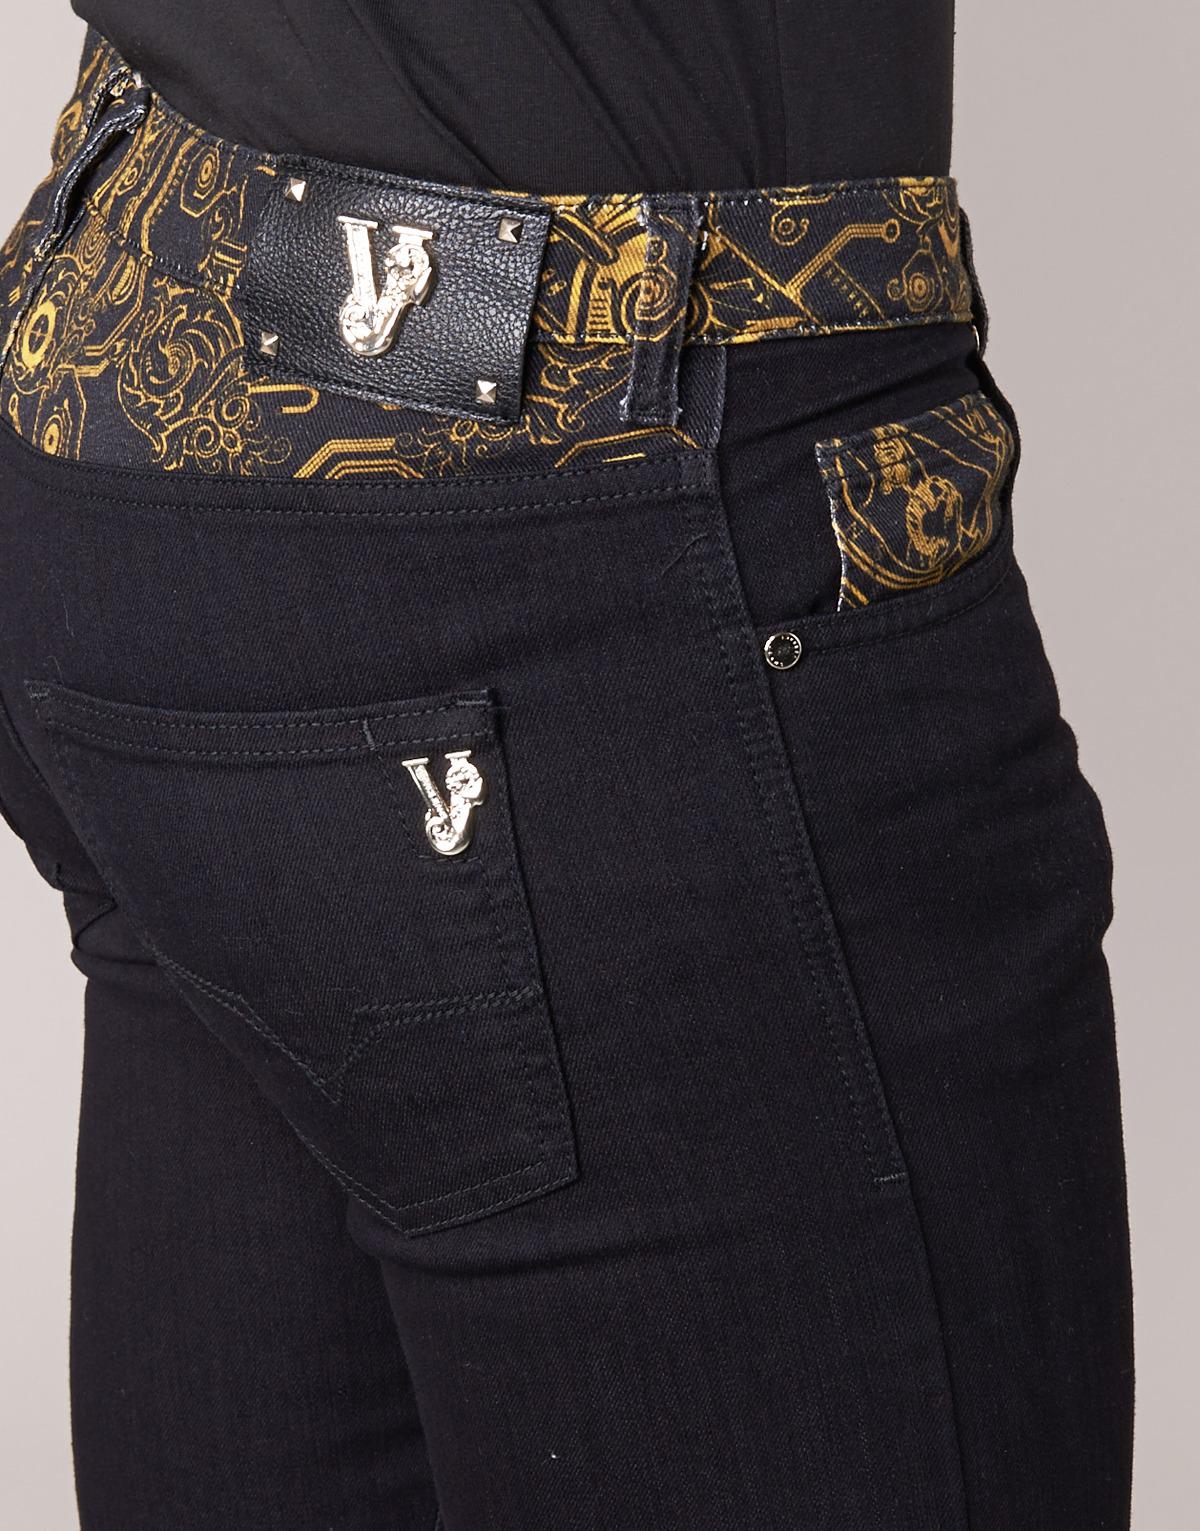 Versace Black Skinny Jeans Greece, SAVE 30% - easygolf.co.th